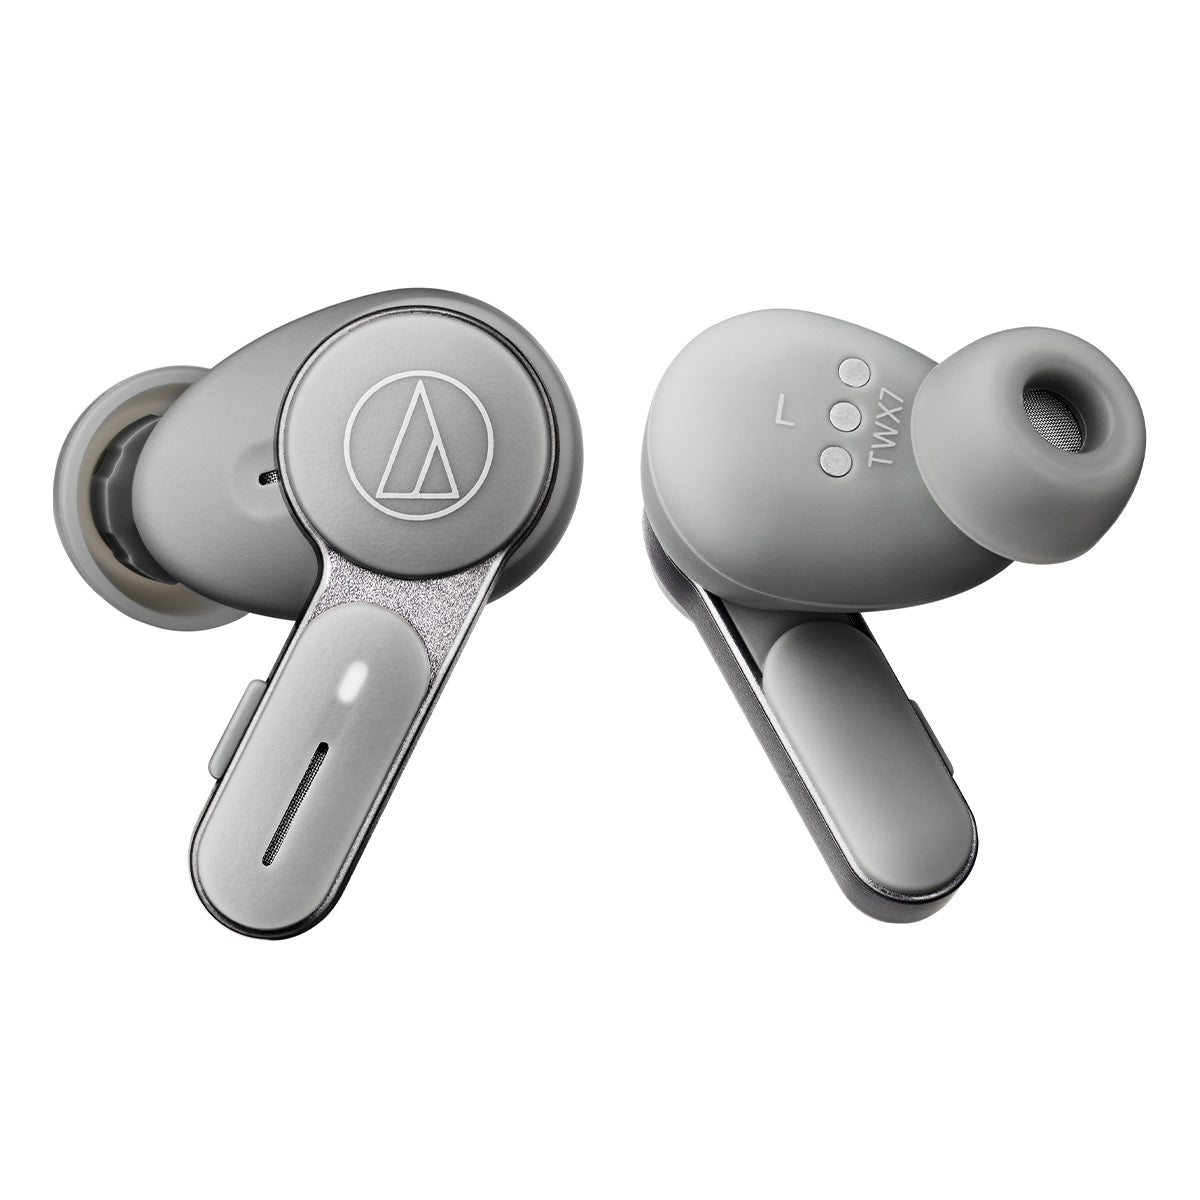 AudioTechnica ATH-TWX7 Truly Wireless Earbuds (Gray)